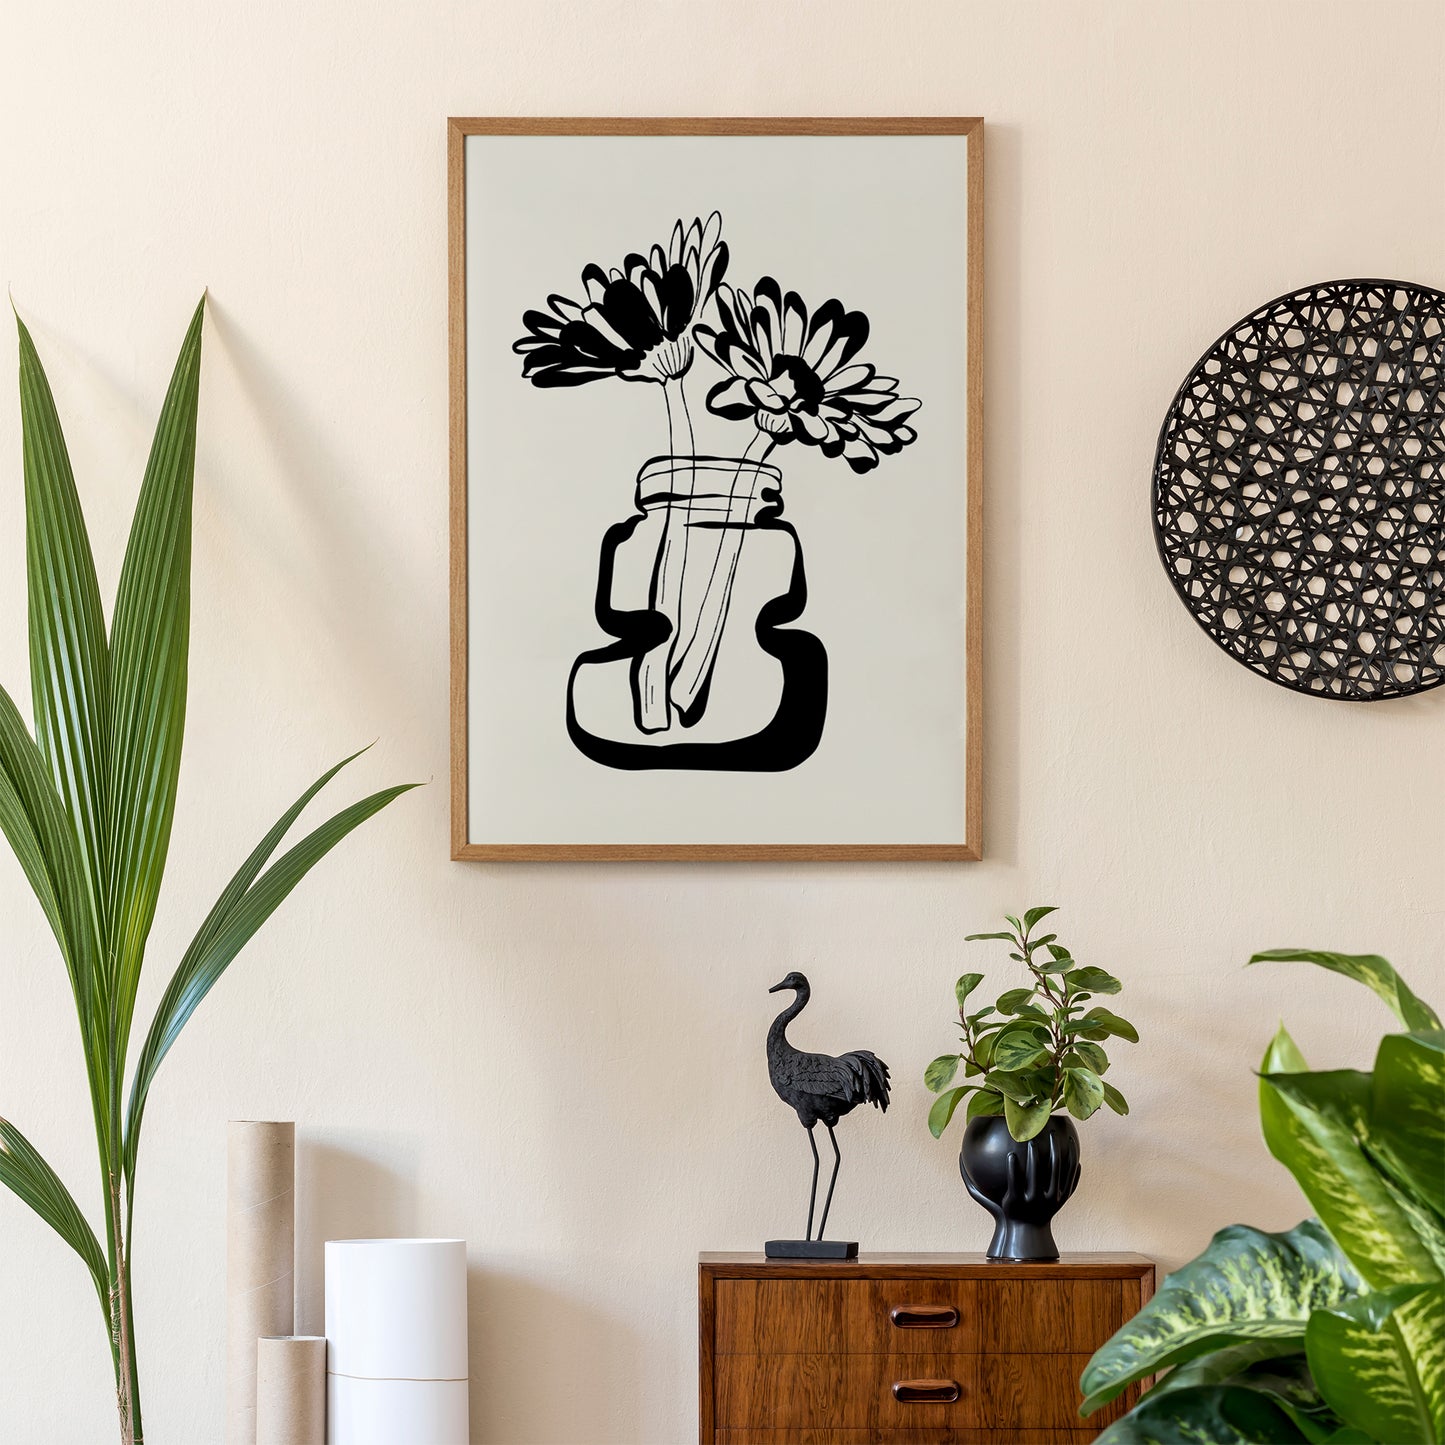 Handdrawn Retro Ceramic with Flowers Poster